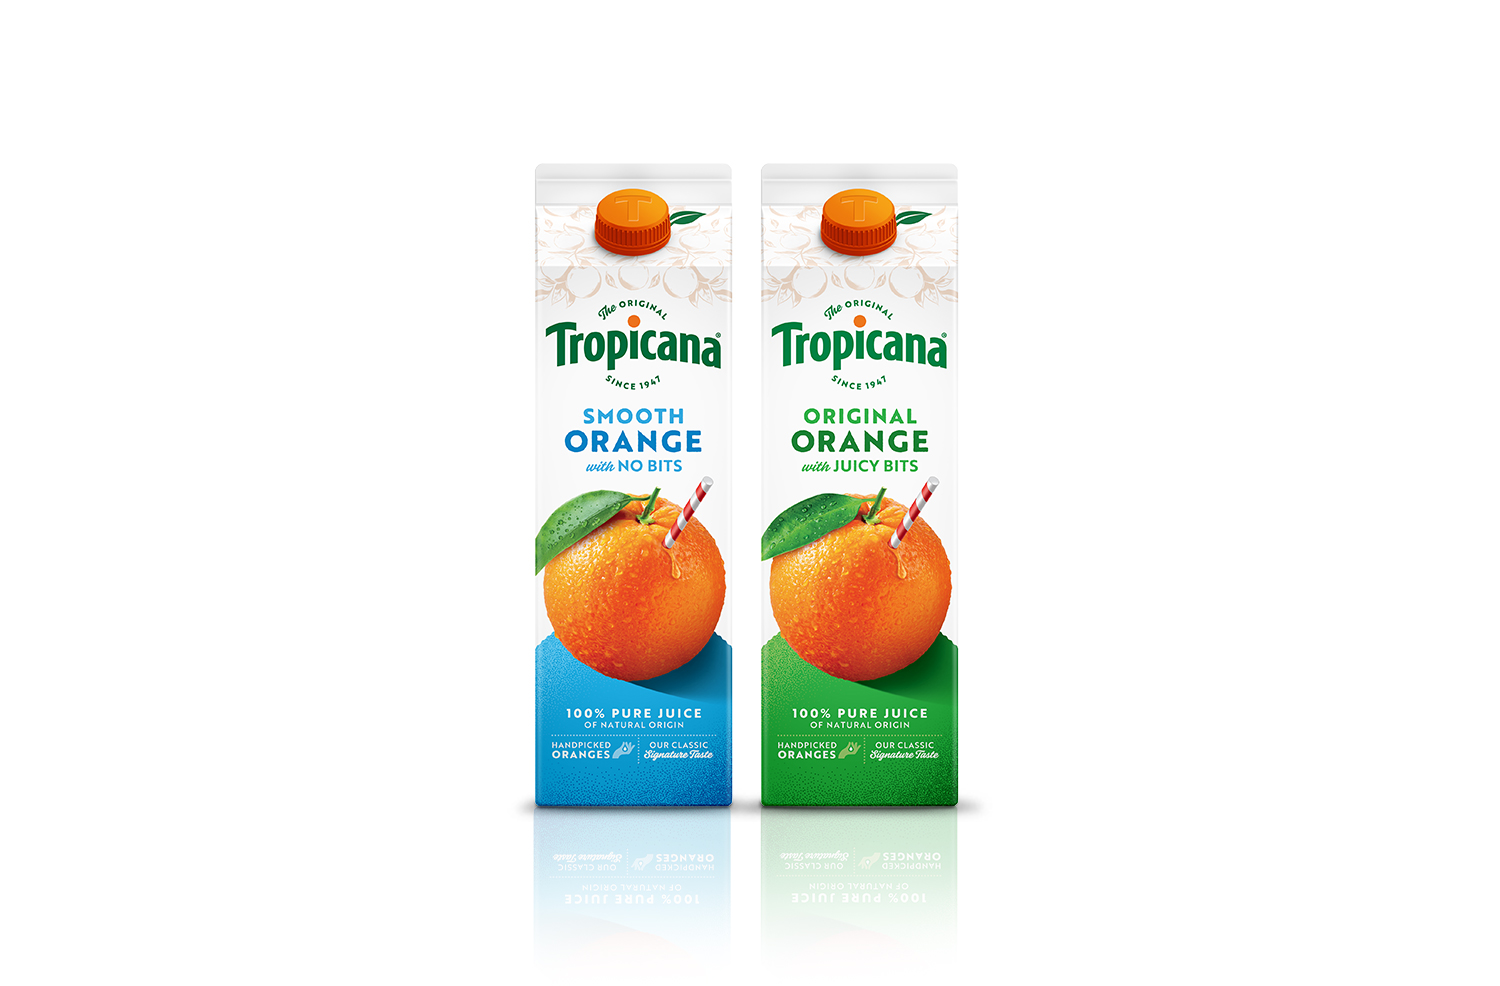 Tropicana handpick the best oranges for the best taste